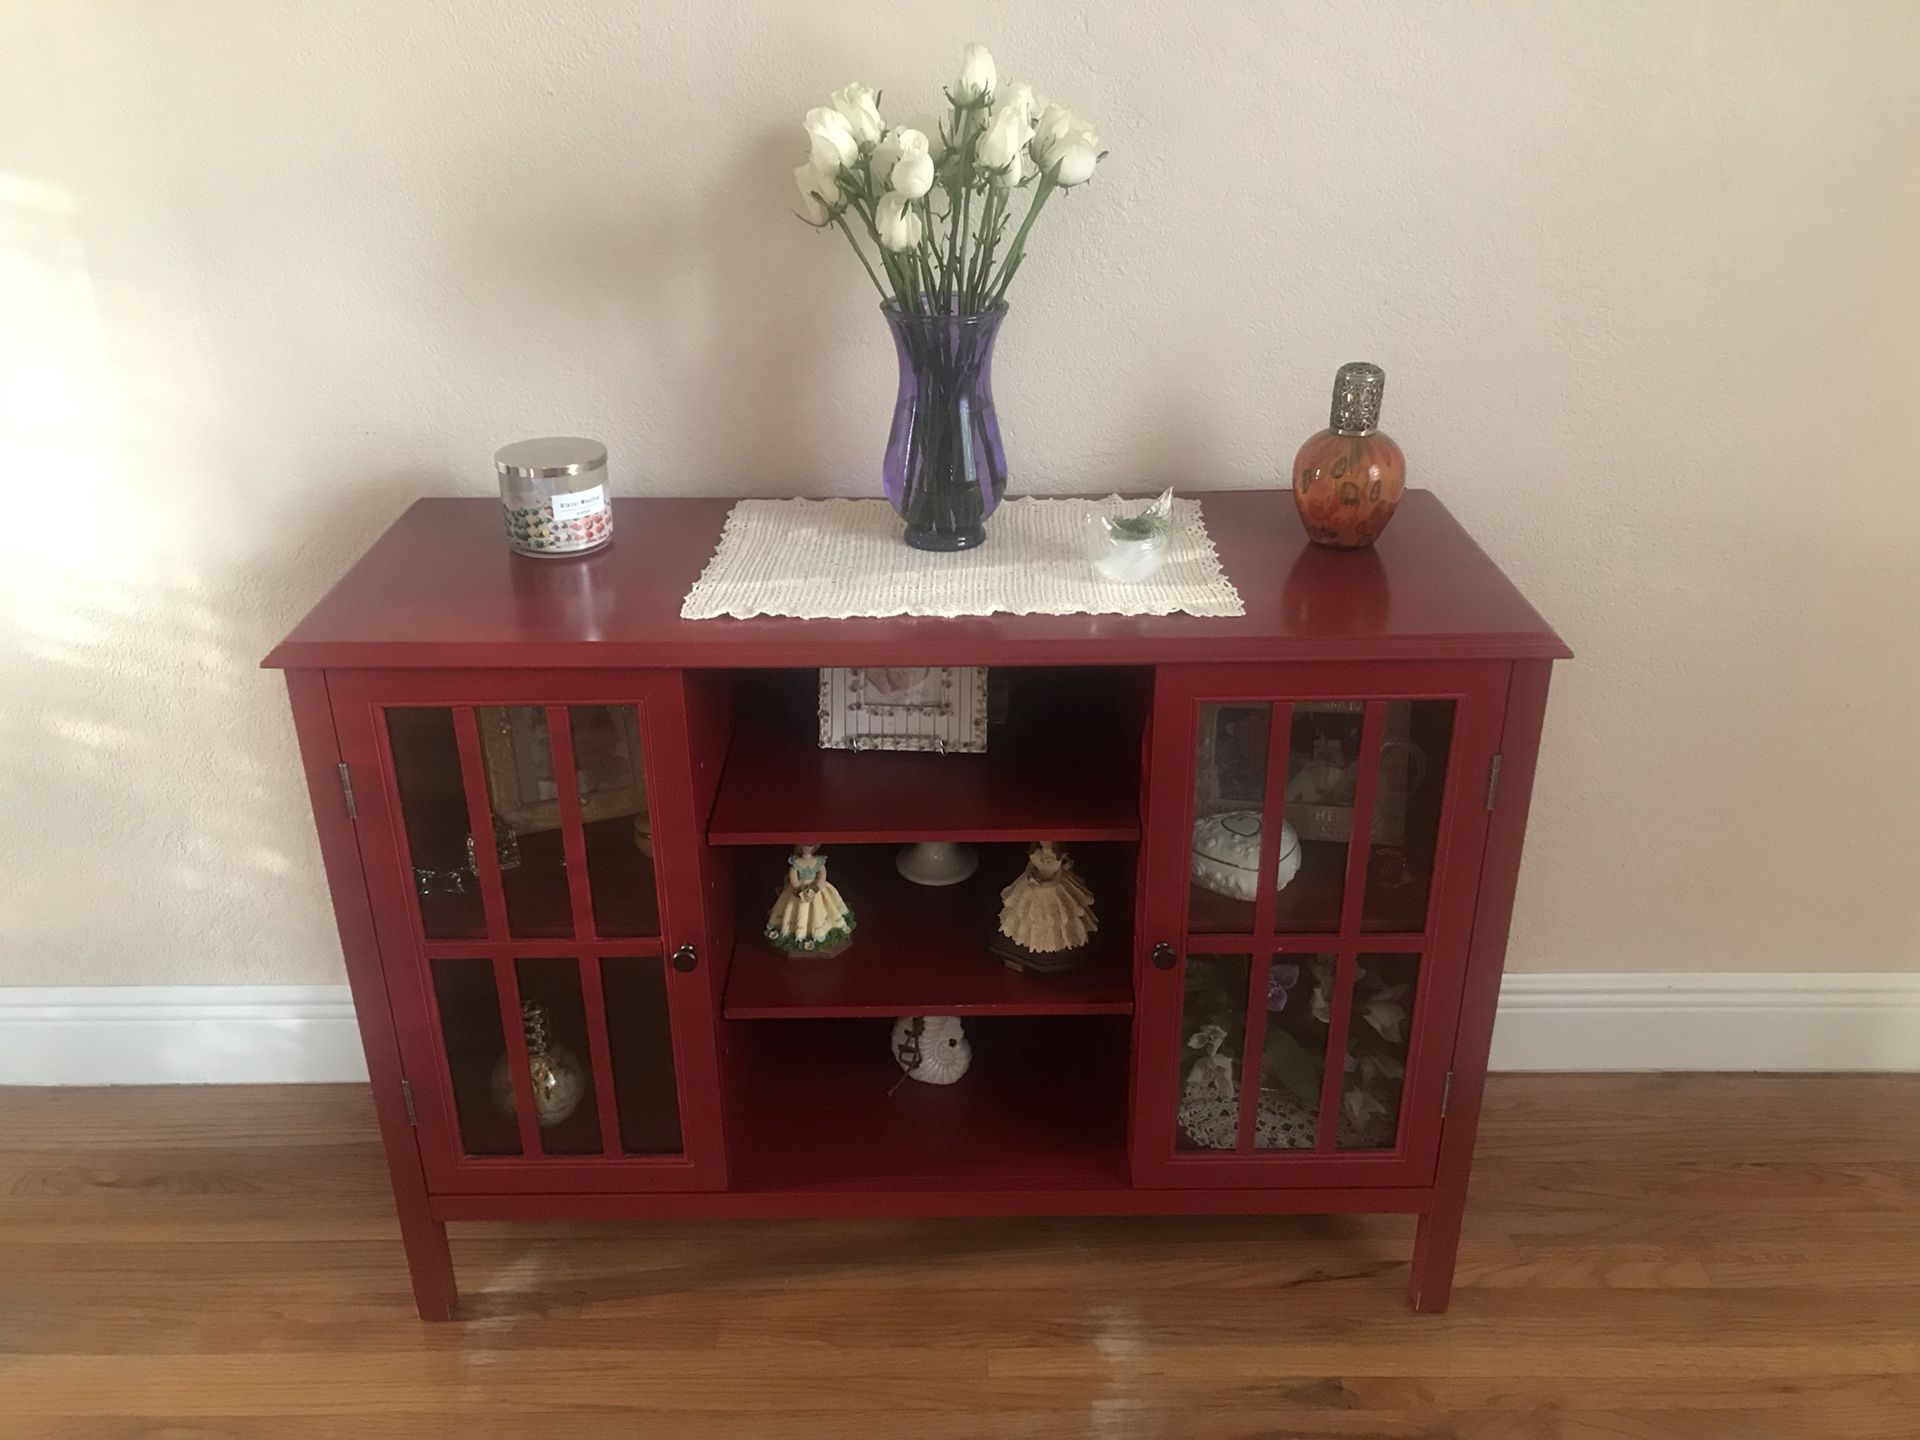 Red table in mint condition